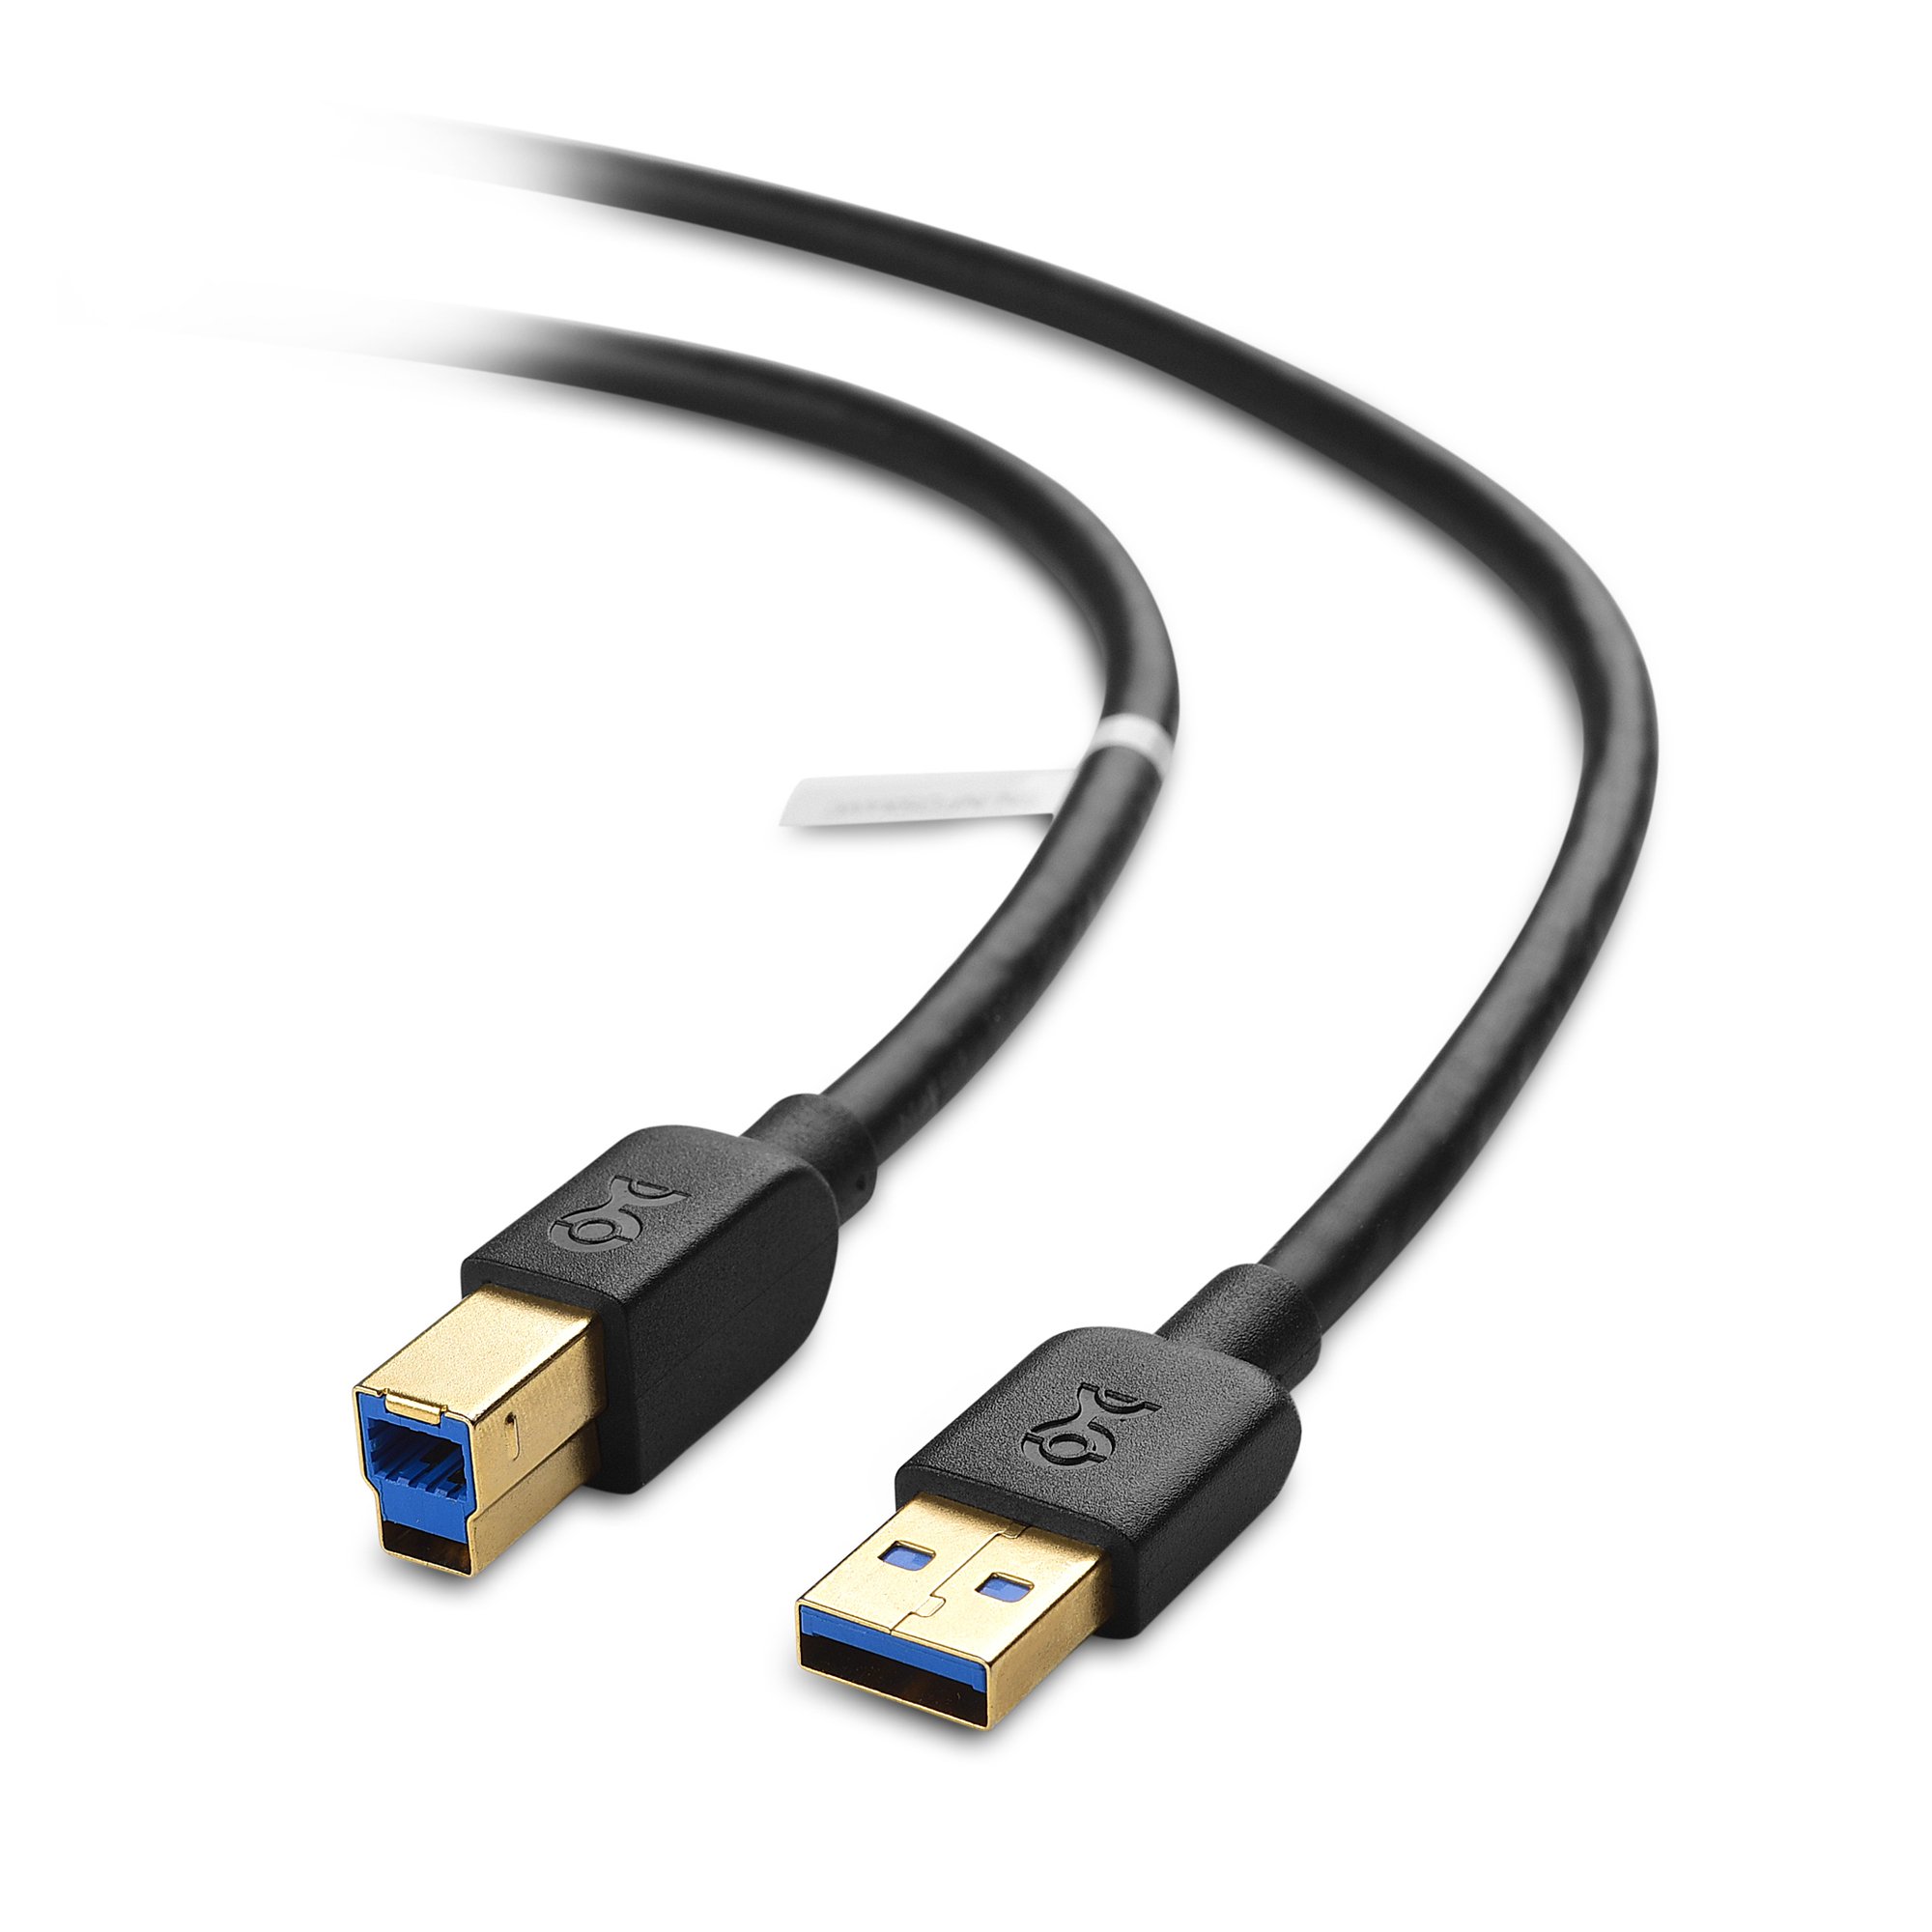 Cable Matters USB 3.0 Cable (USB 3 Cable, USB 3.0 A to B Cable) in Black 6 ft